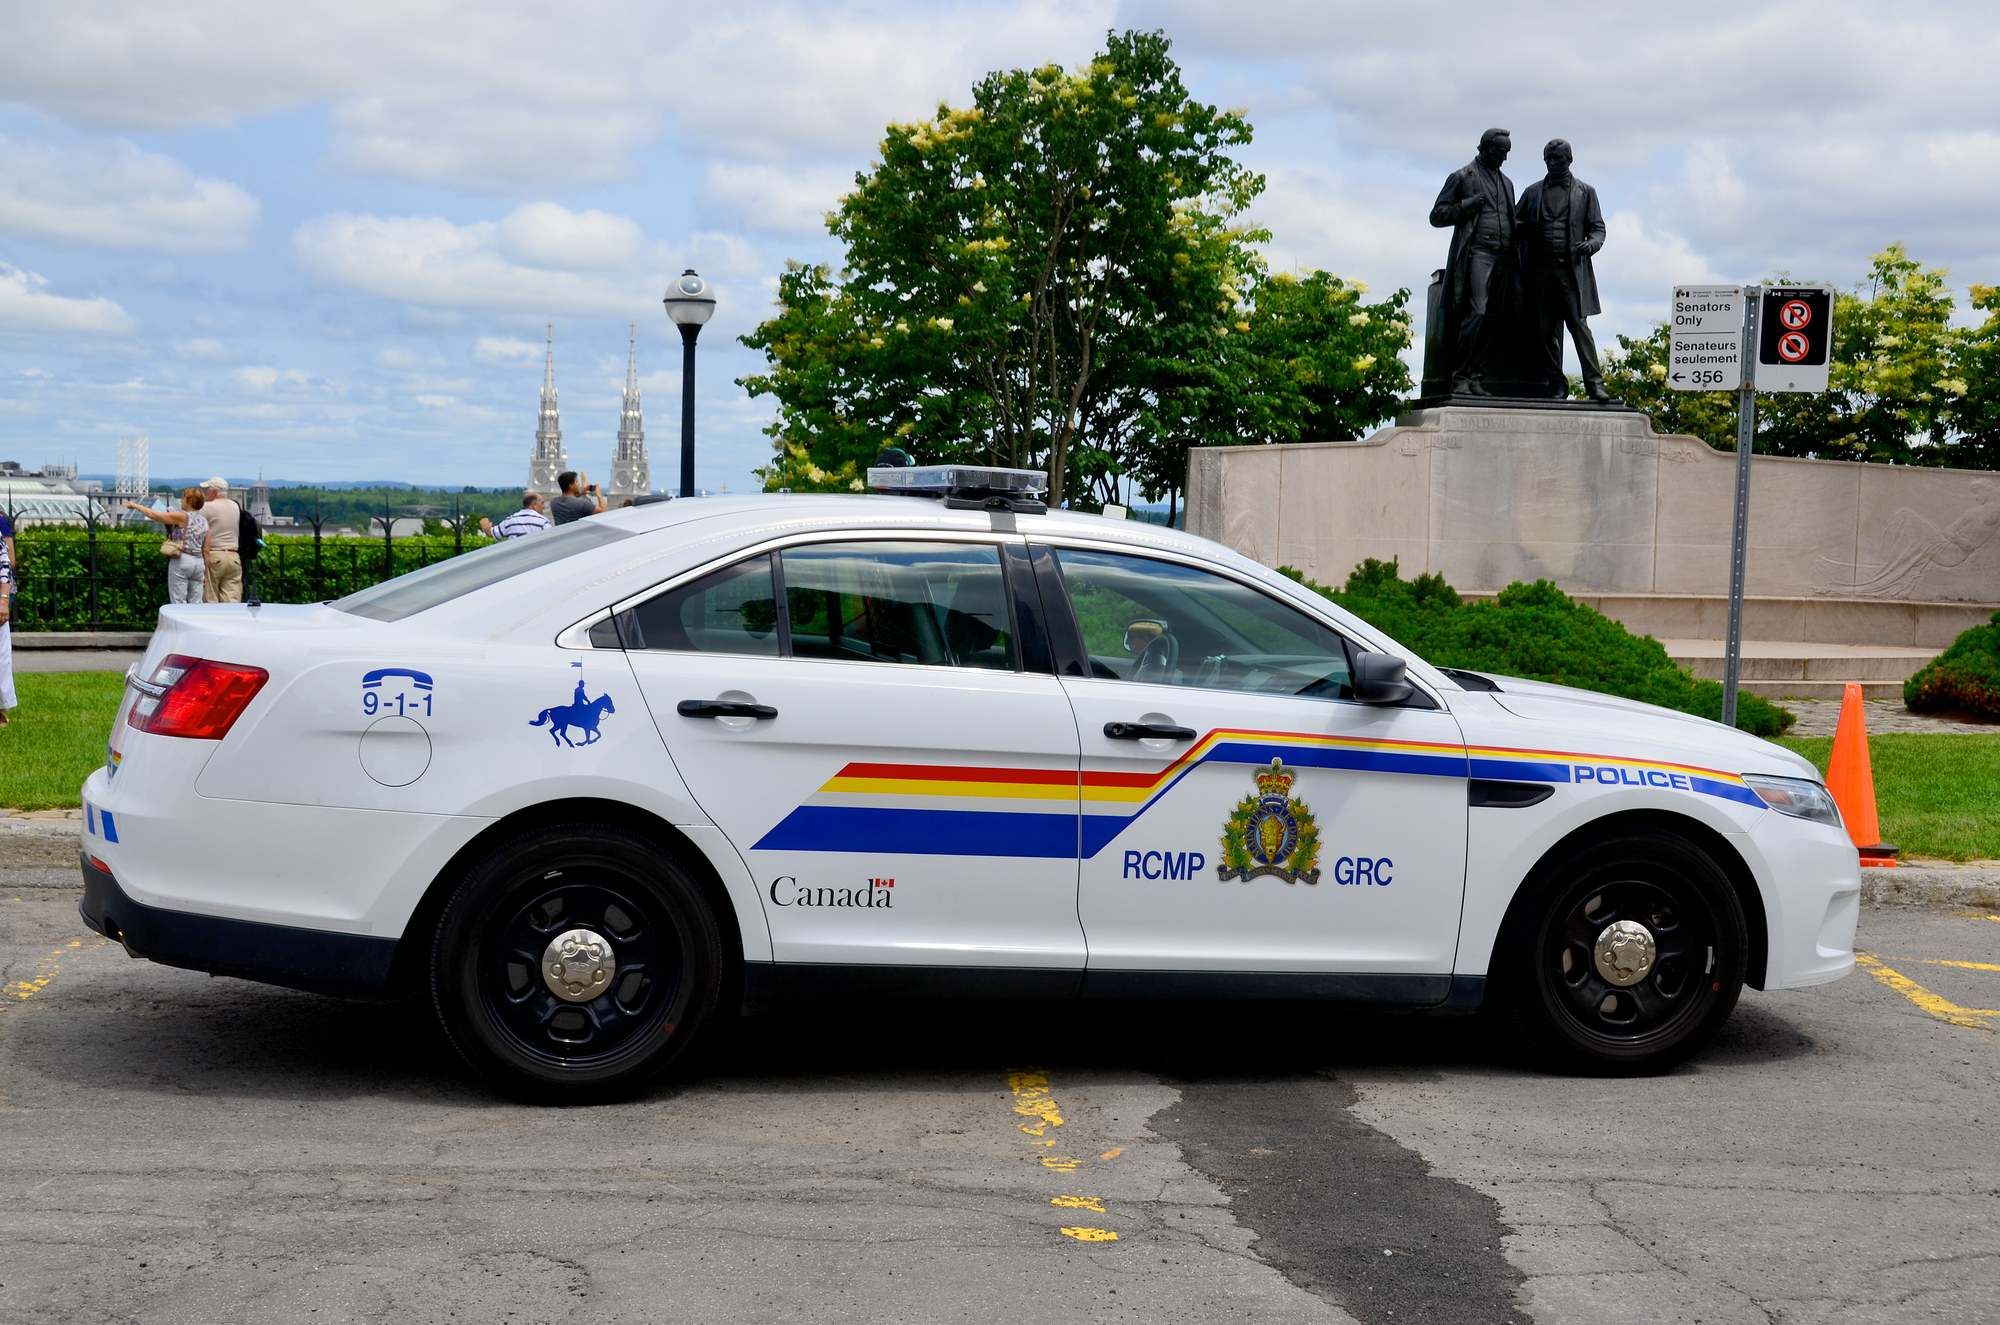 RCMP patrol car regarding the RCMP systemic racism class action lawsuit filed